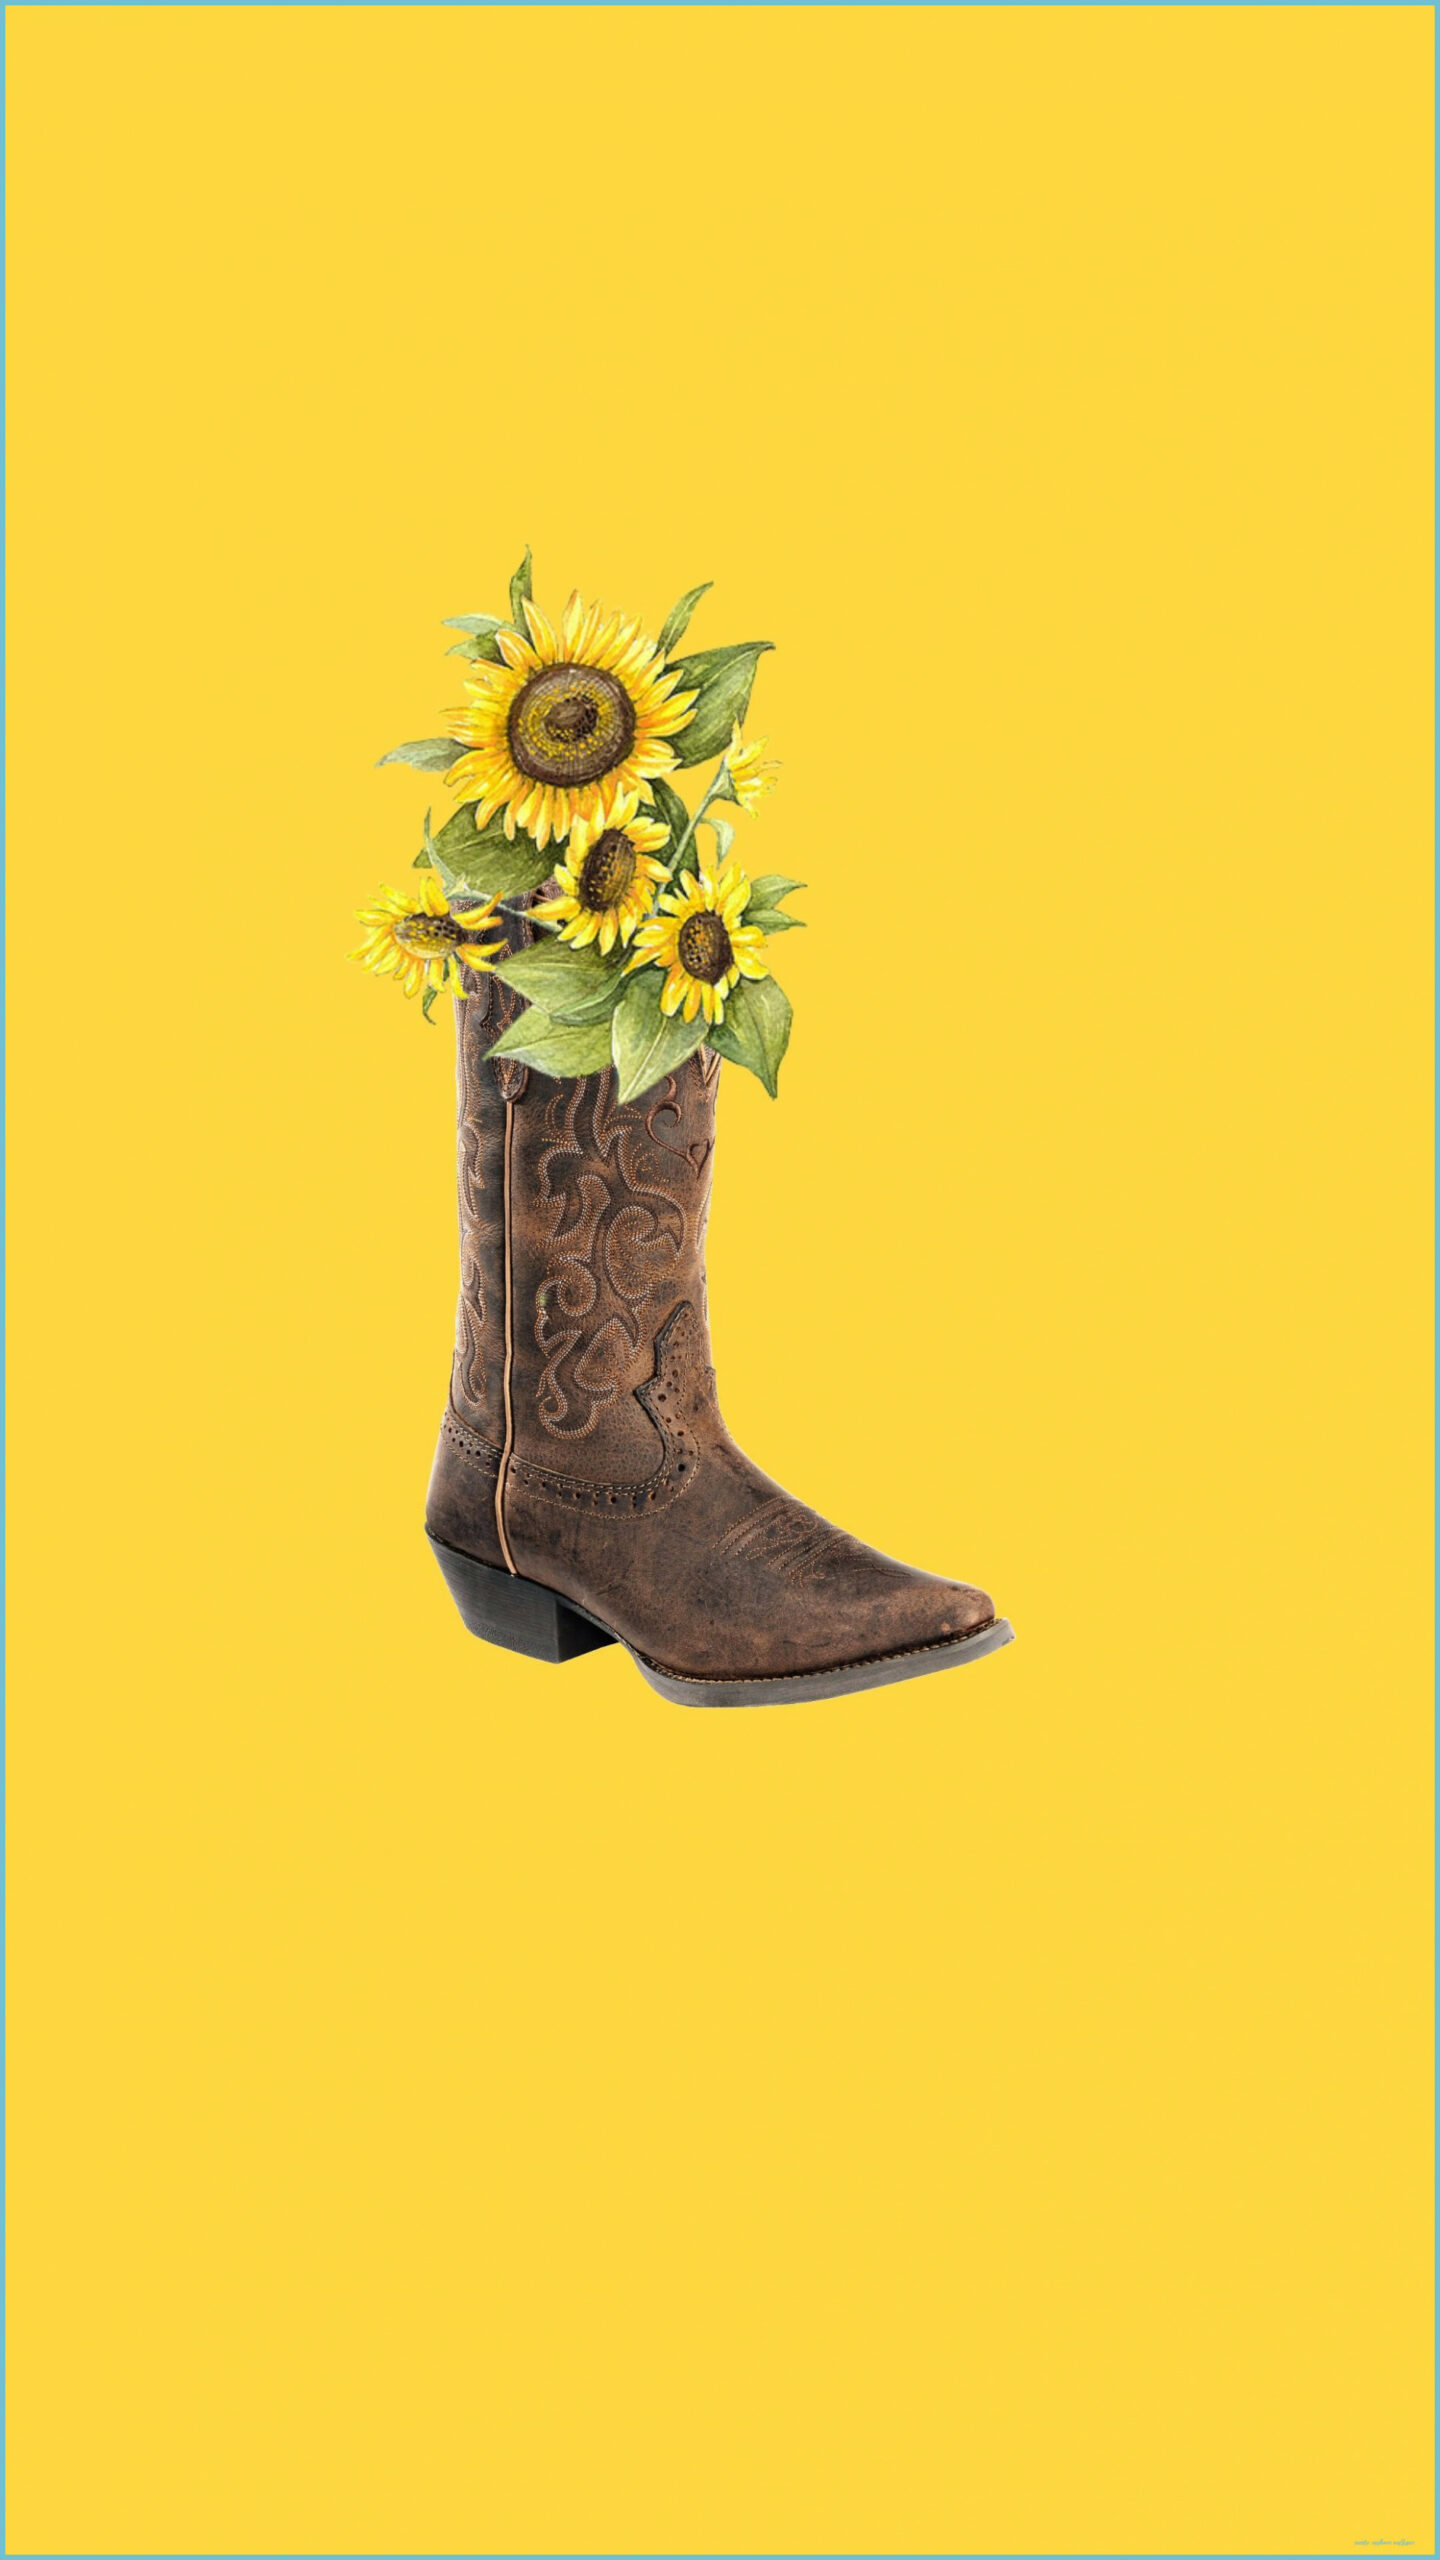 Cowgirl Sunflower Boots IPhone Wallpaper #sunflowerwallpaper Sunflower Wallpaper